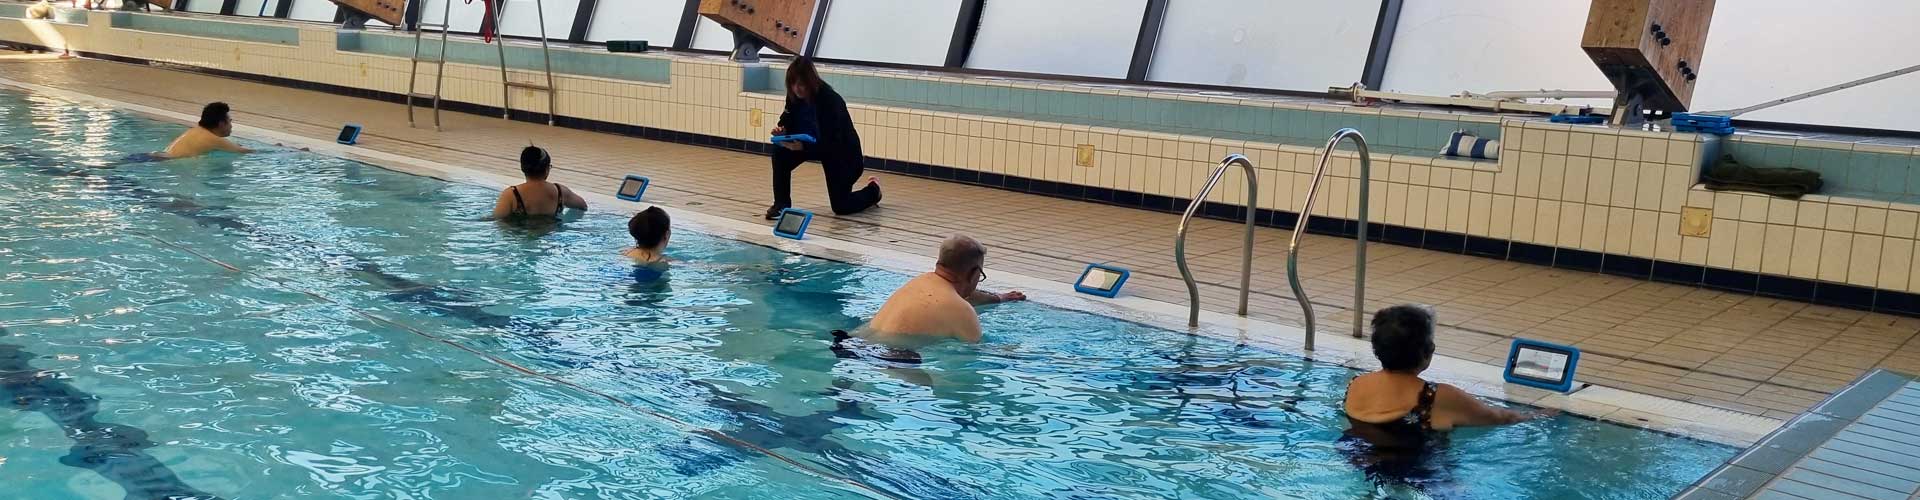 People poolside using iPads in Good Boost session